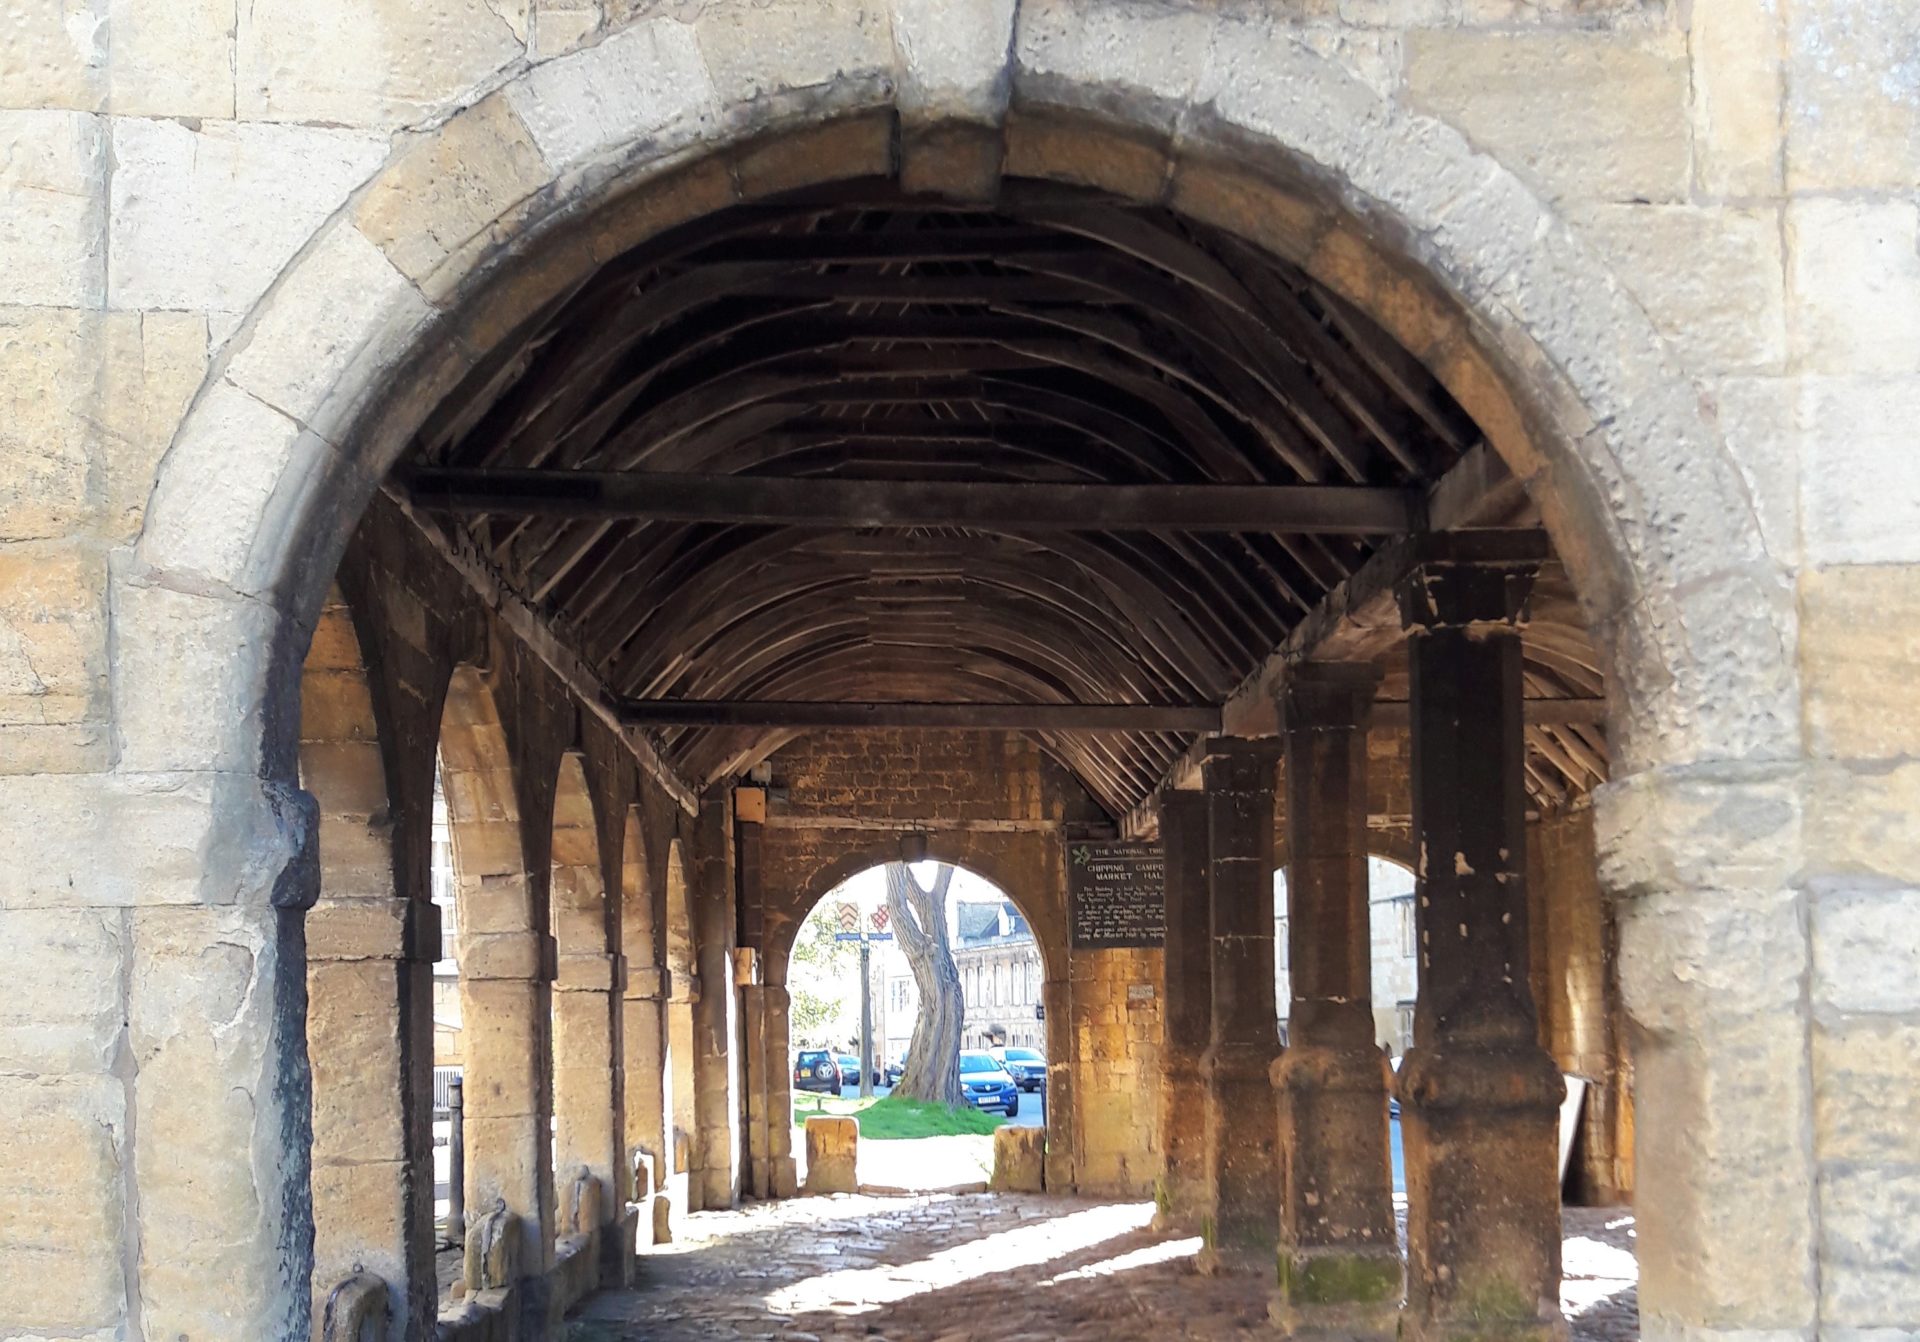 View inside the |Market Hall, Chipping Campden